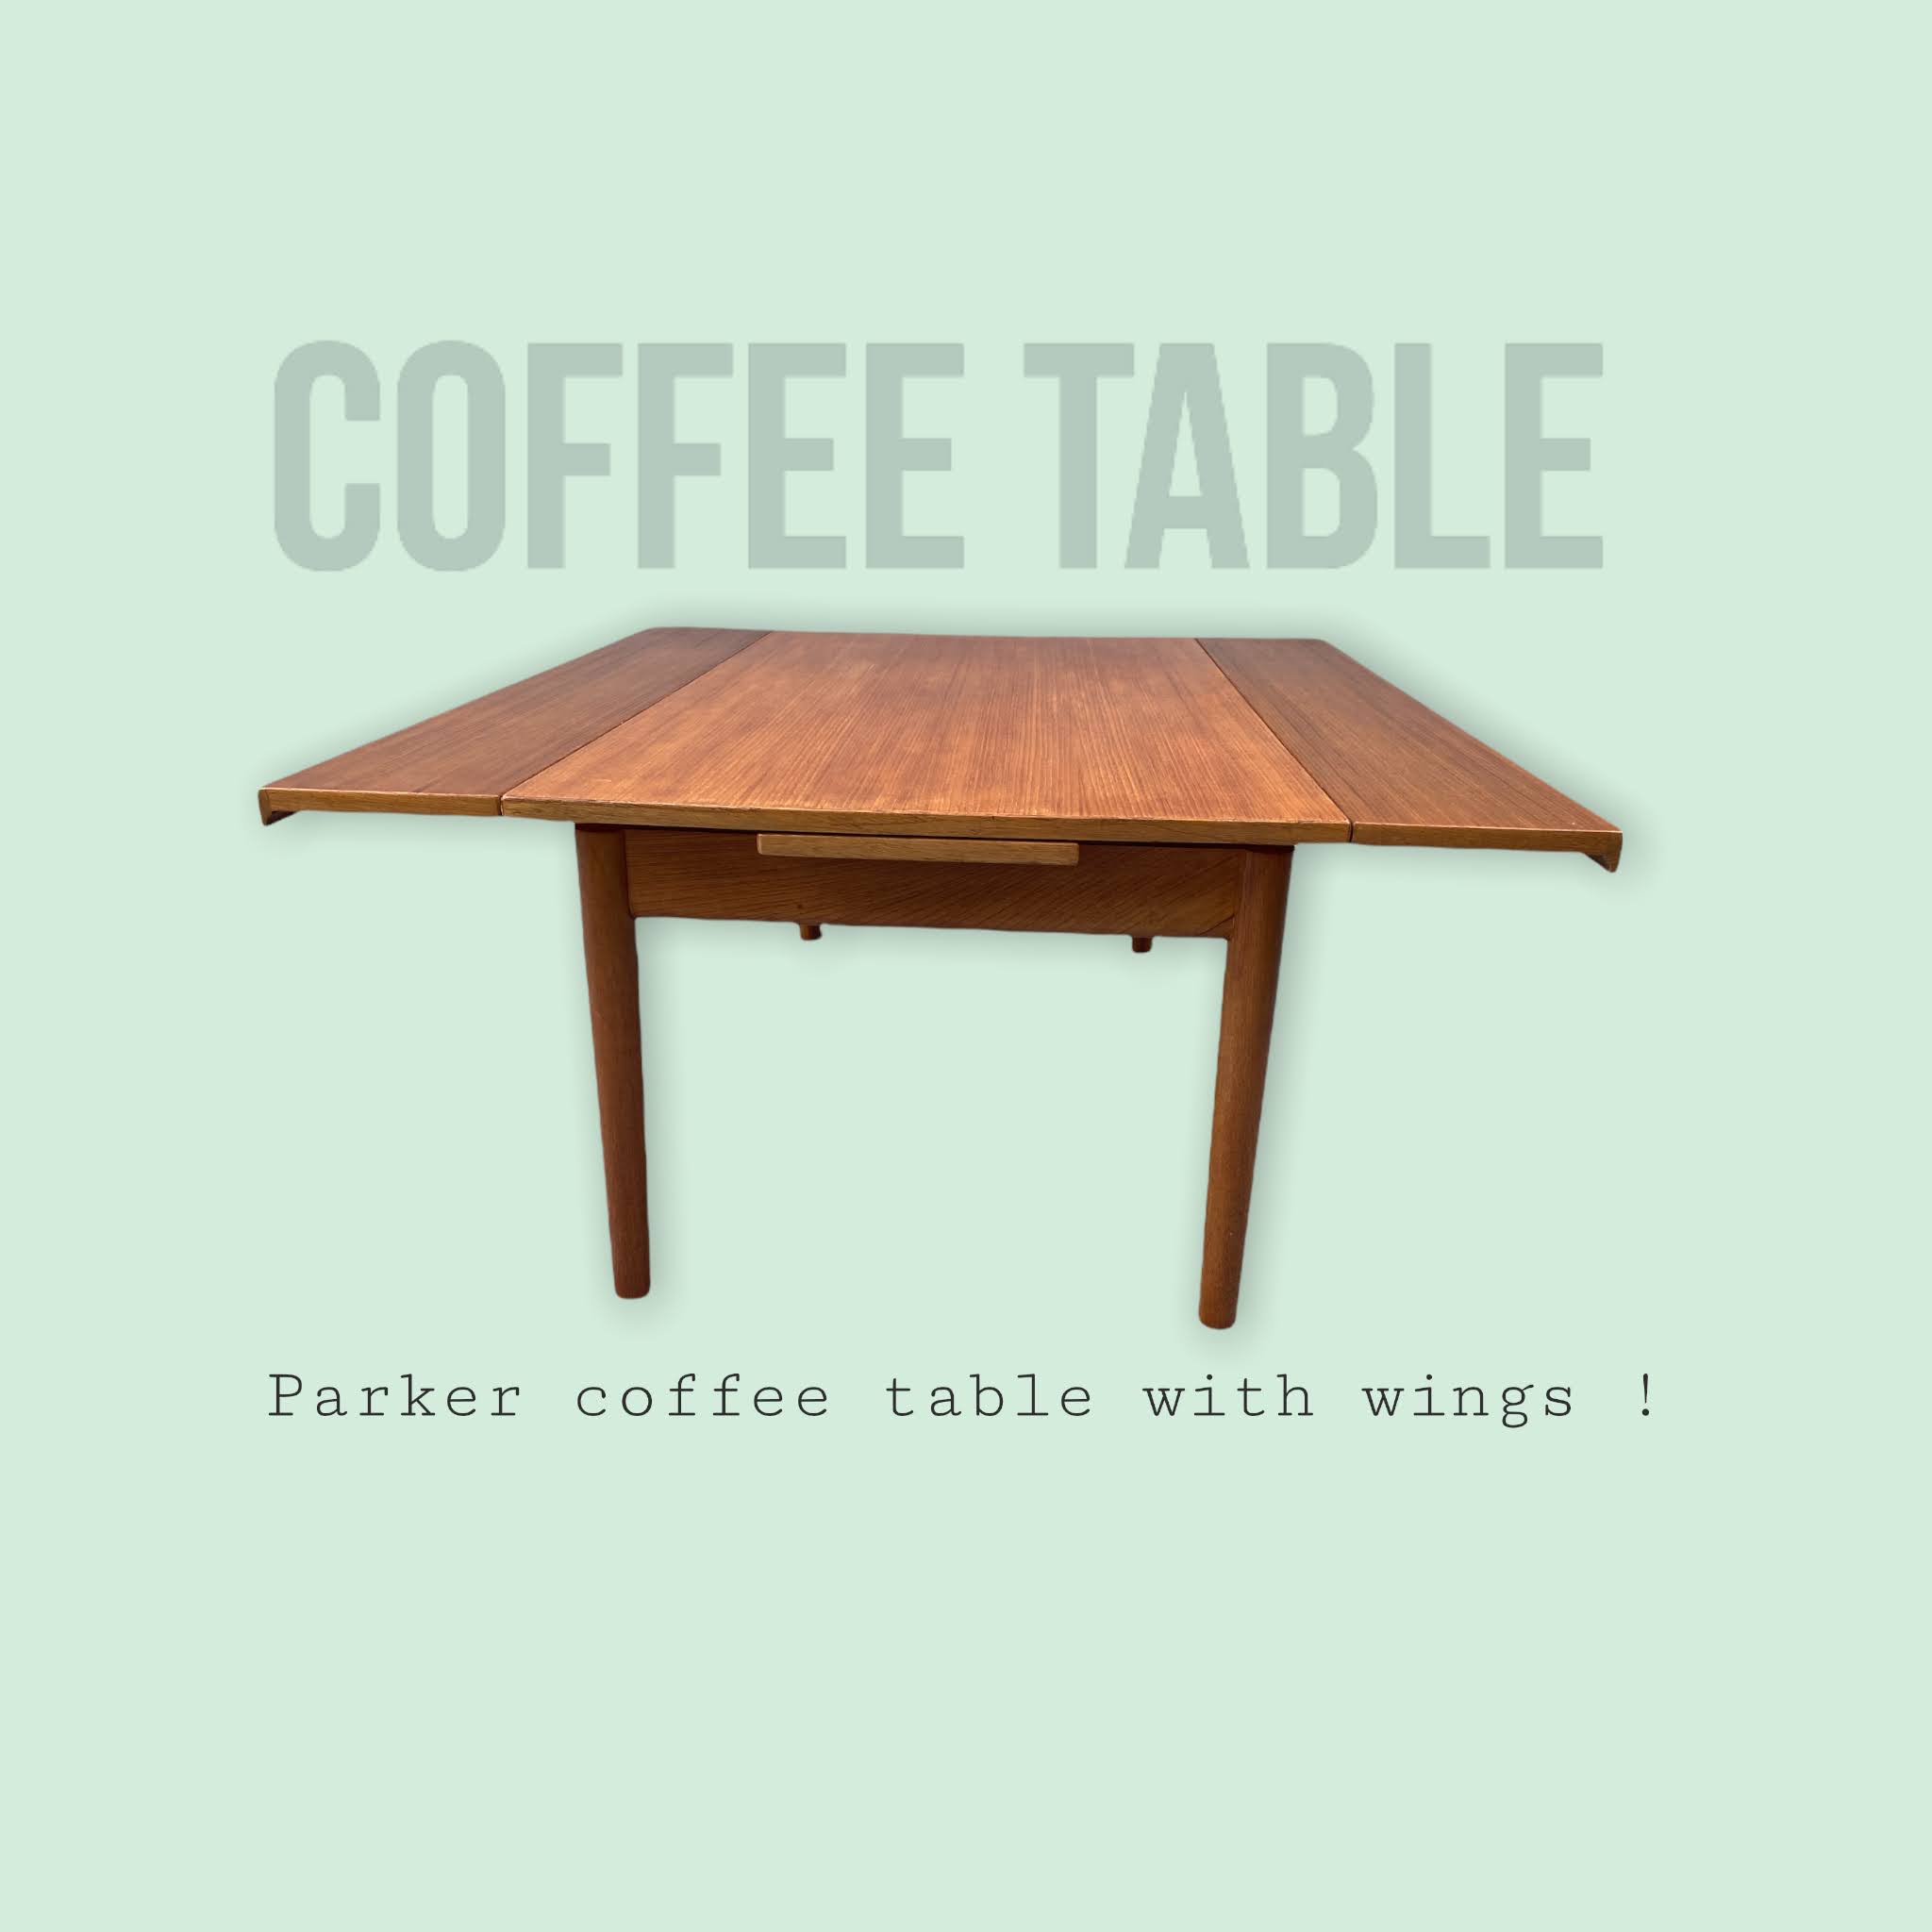 Parker Coffee table